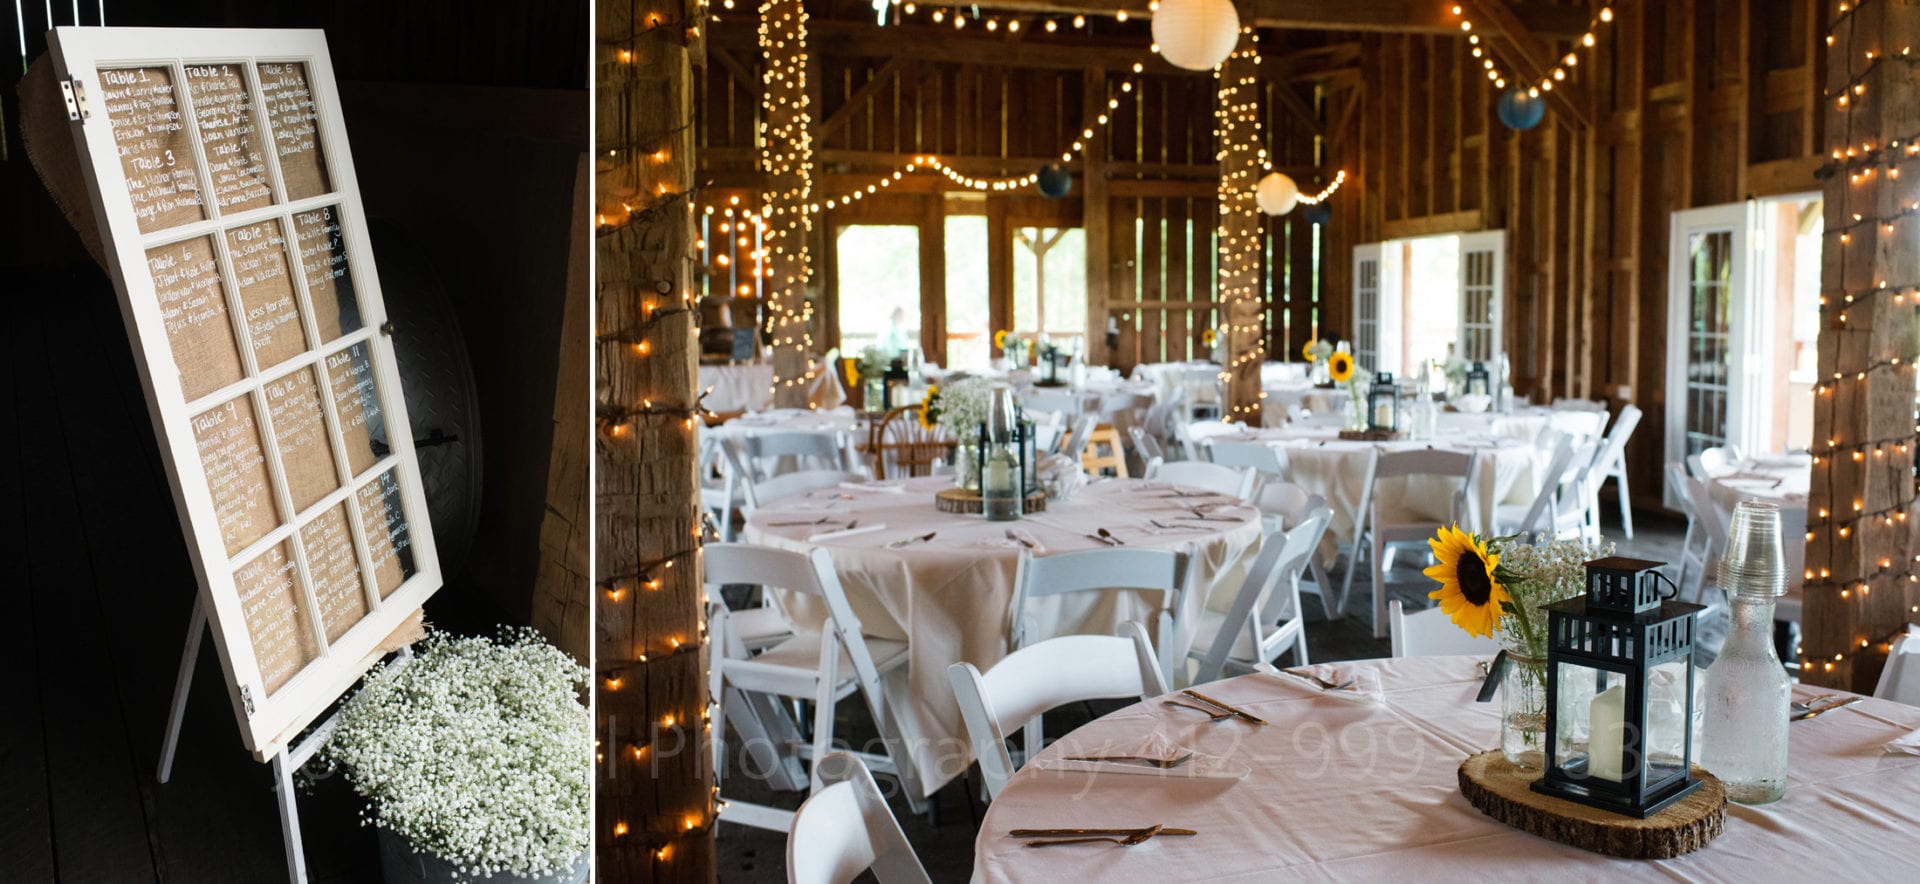 two photos: detail photo of a seating chart written with paint marker on the panes of a 3 over 4 window backed by burlap. The other photo is an overall of a lovely decorated interior of a barn with tables and centerpieces set for an Armstrong Farms Wedding.